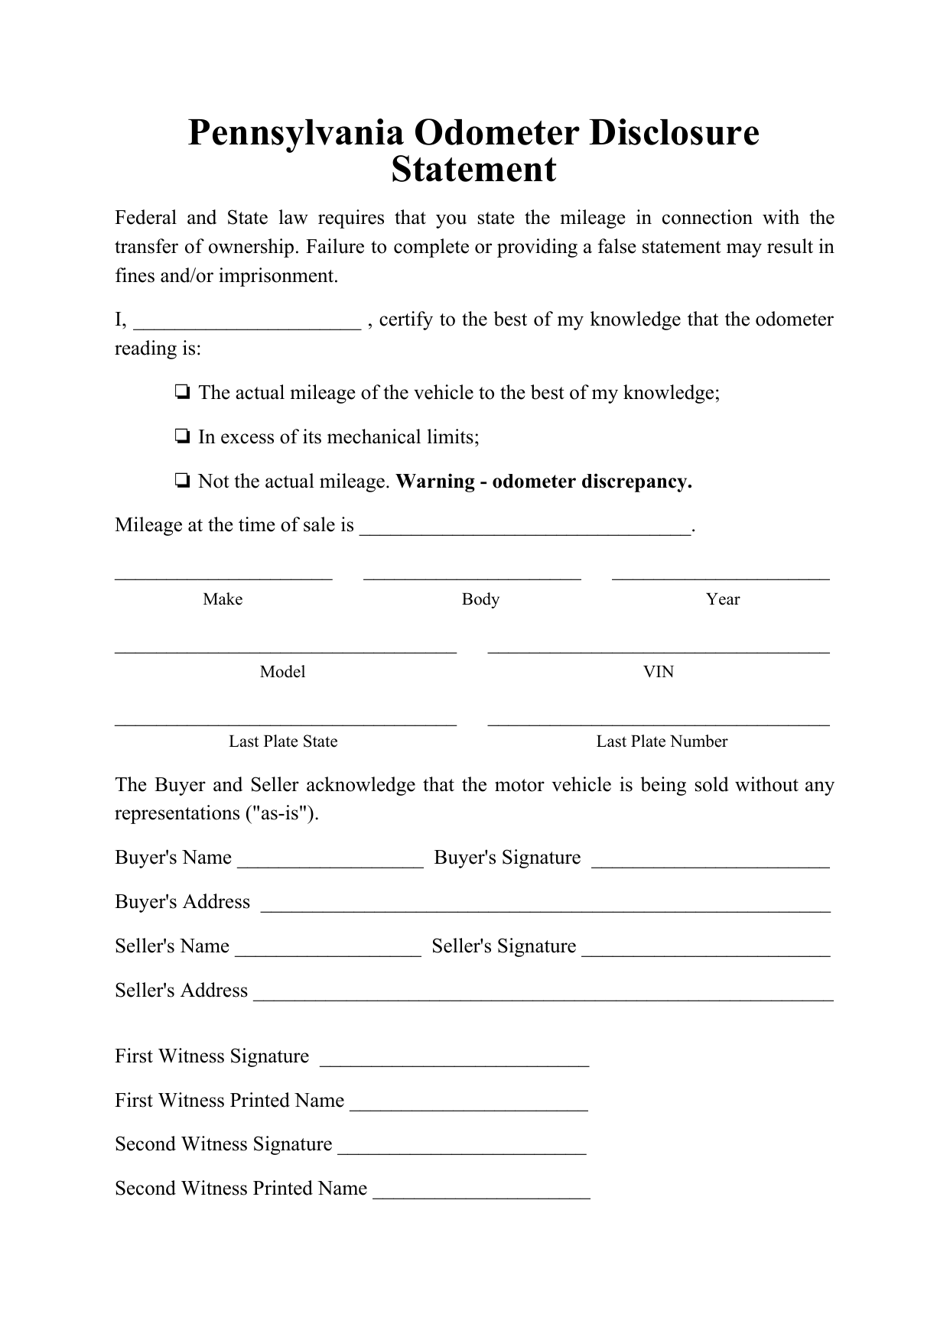 Odometer Disclosure Statement Form - Pennsylvania, Page 1